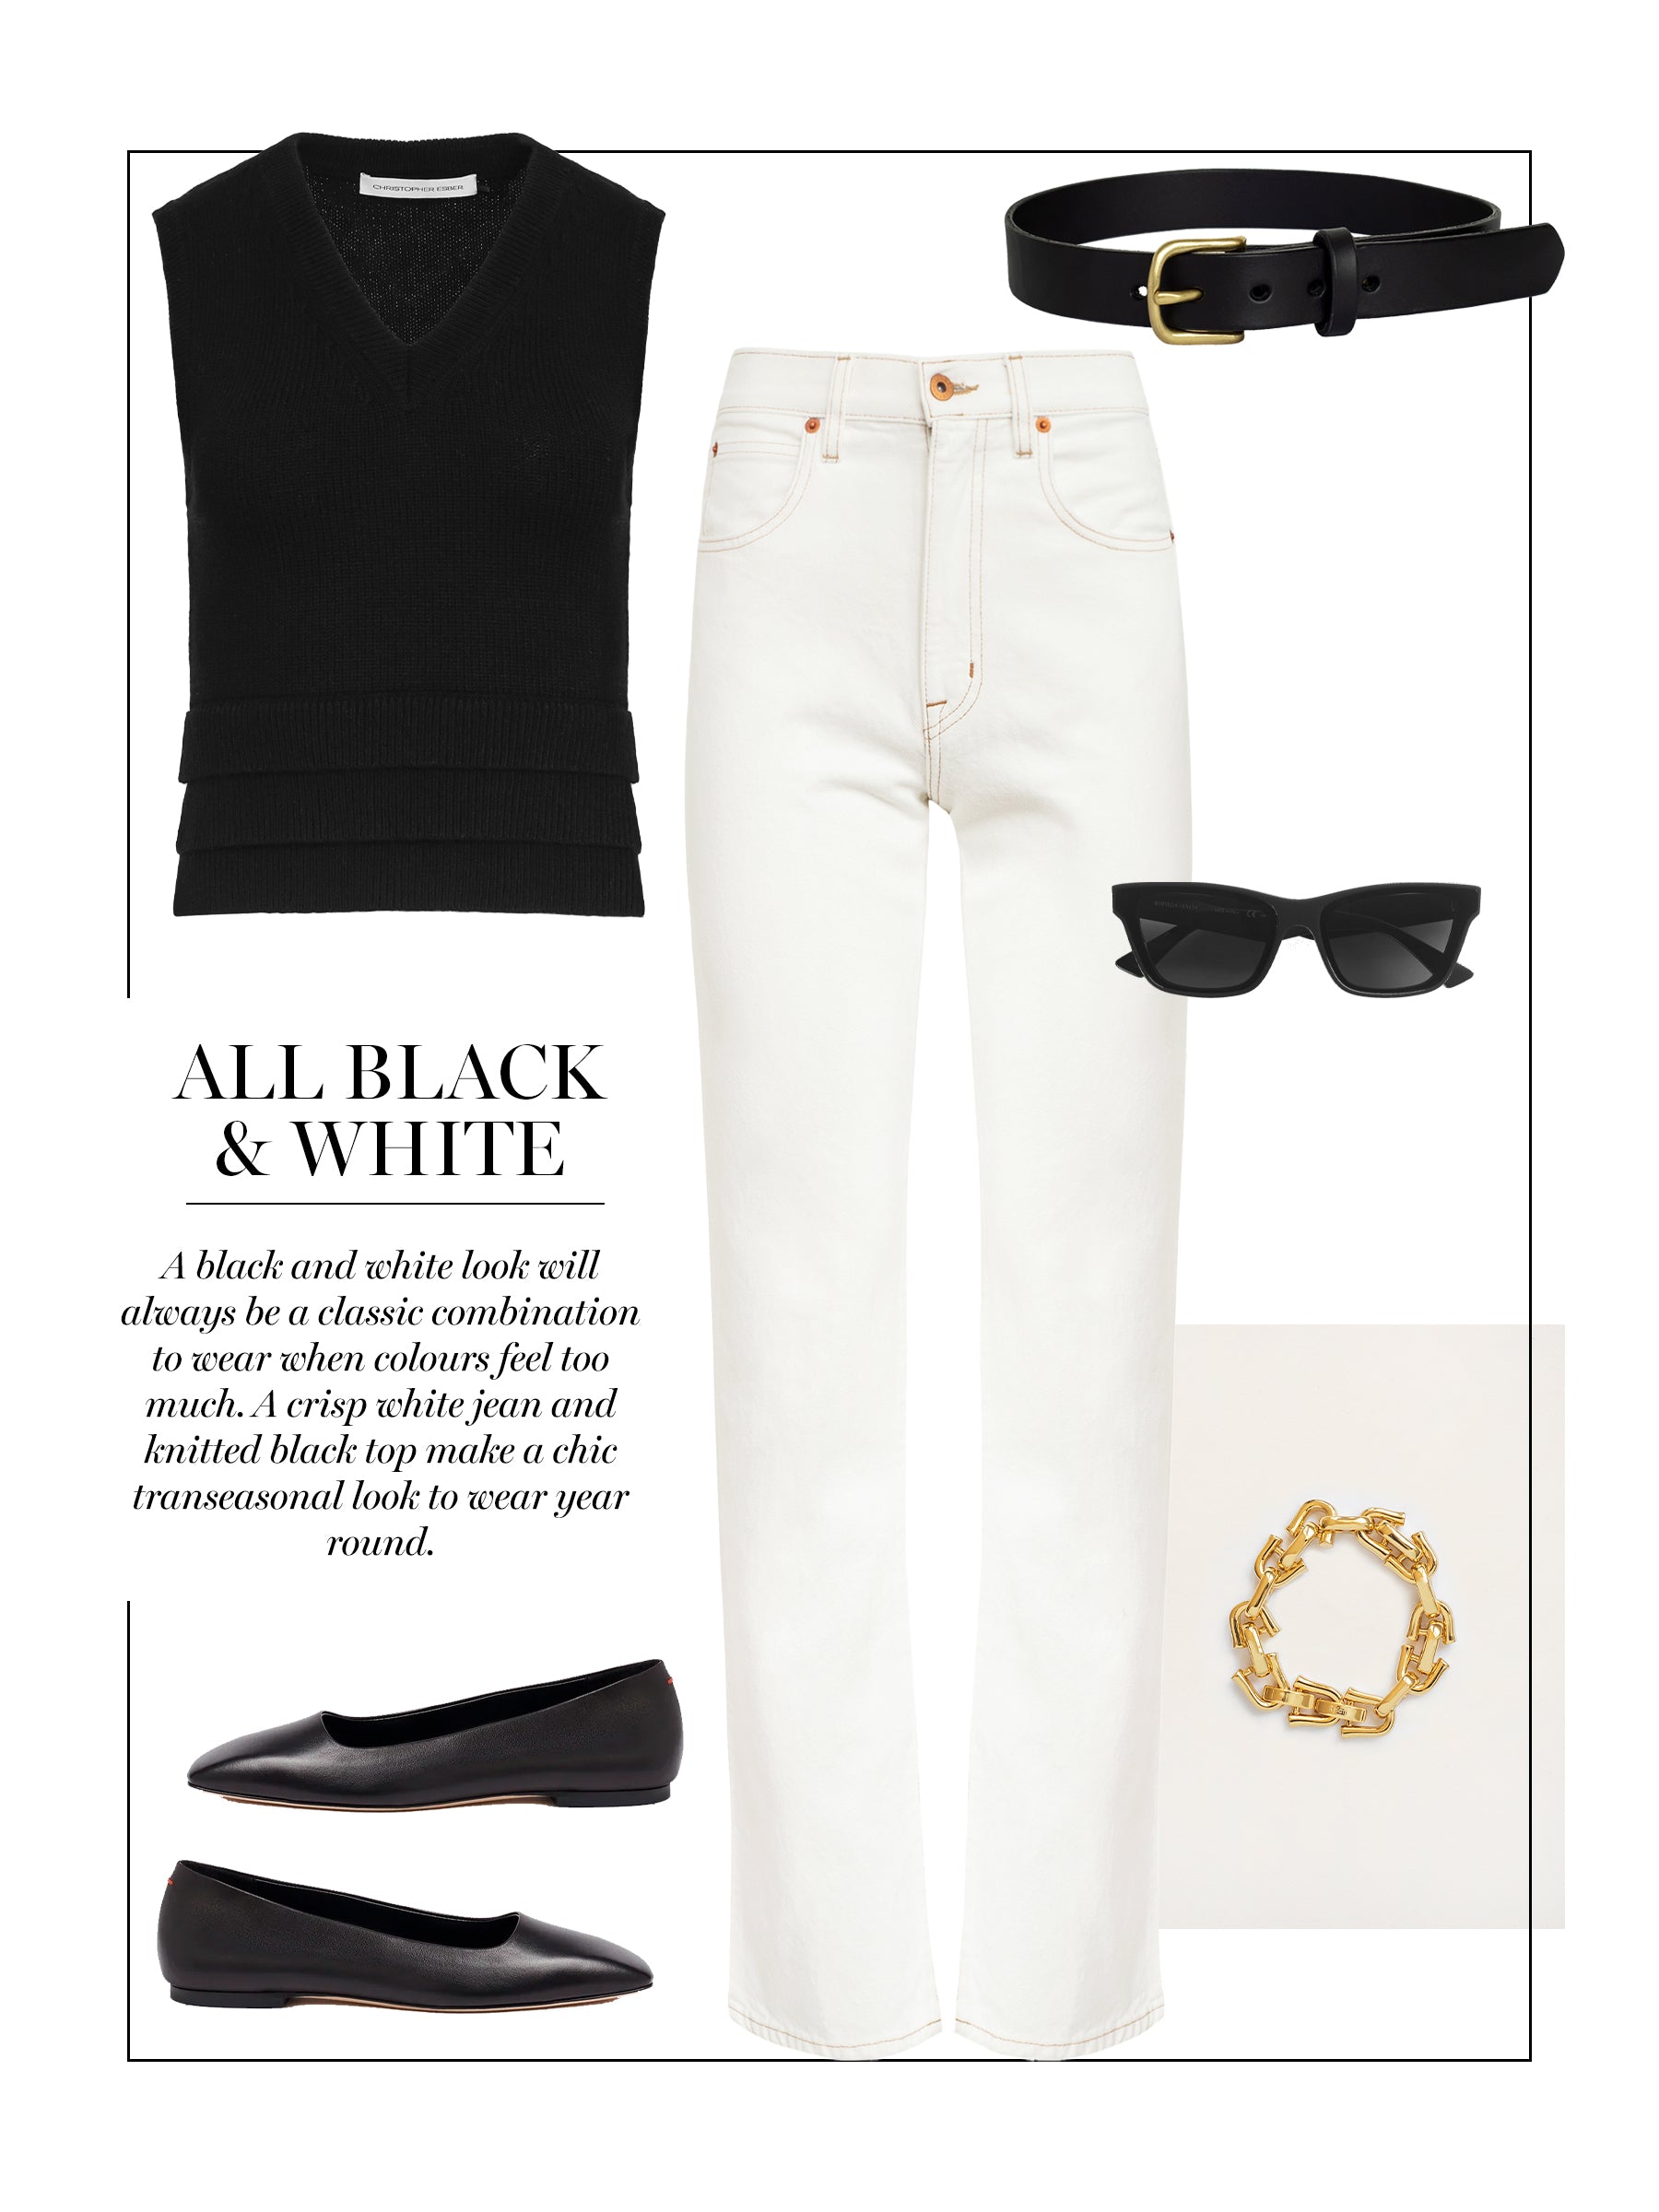 New Season Outfit Ideas - Black and White